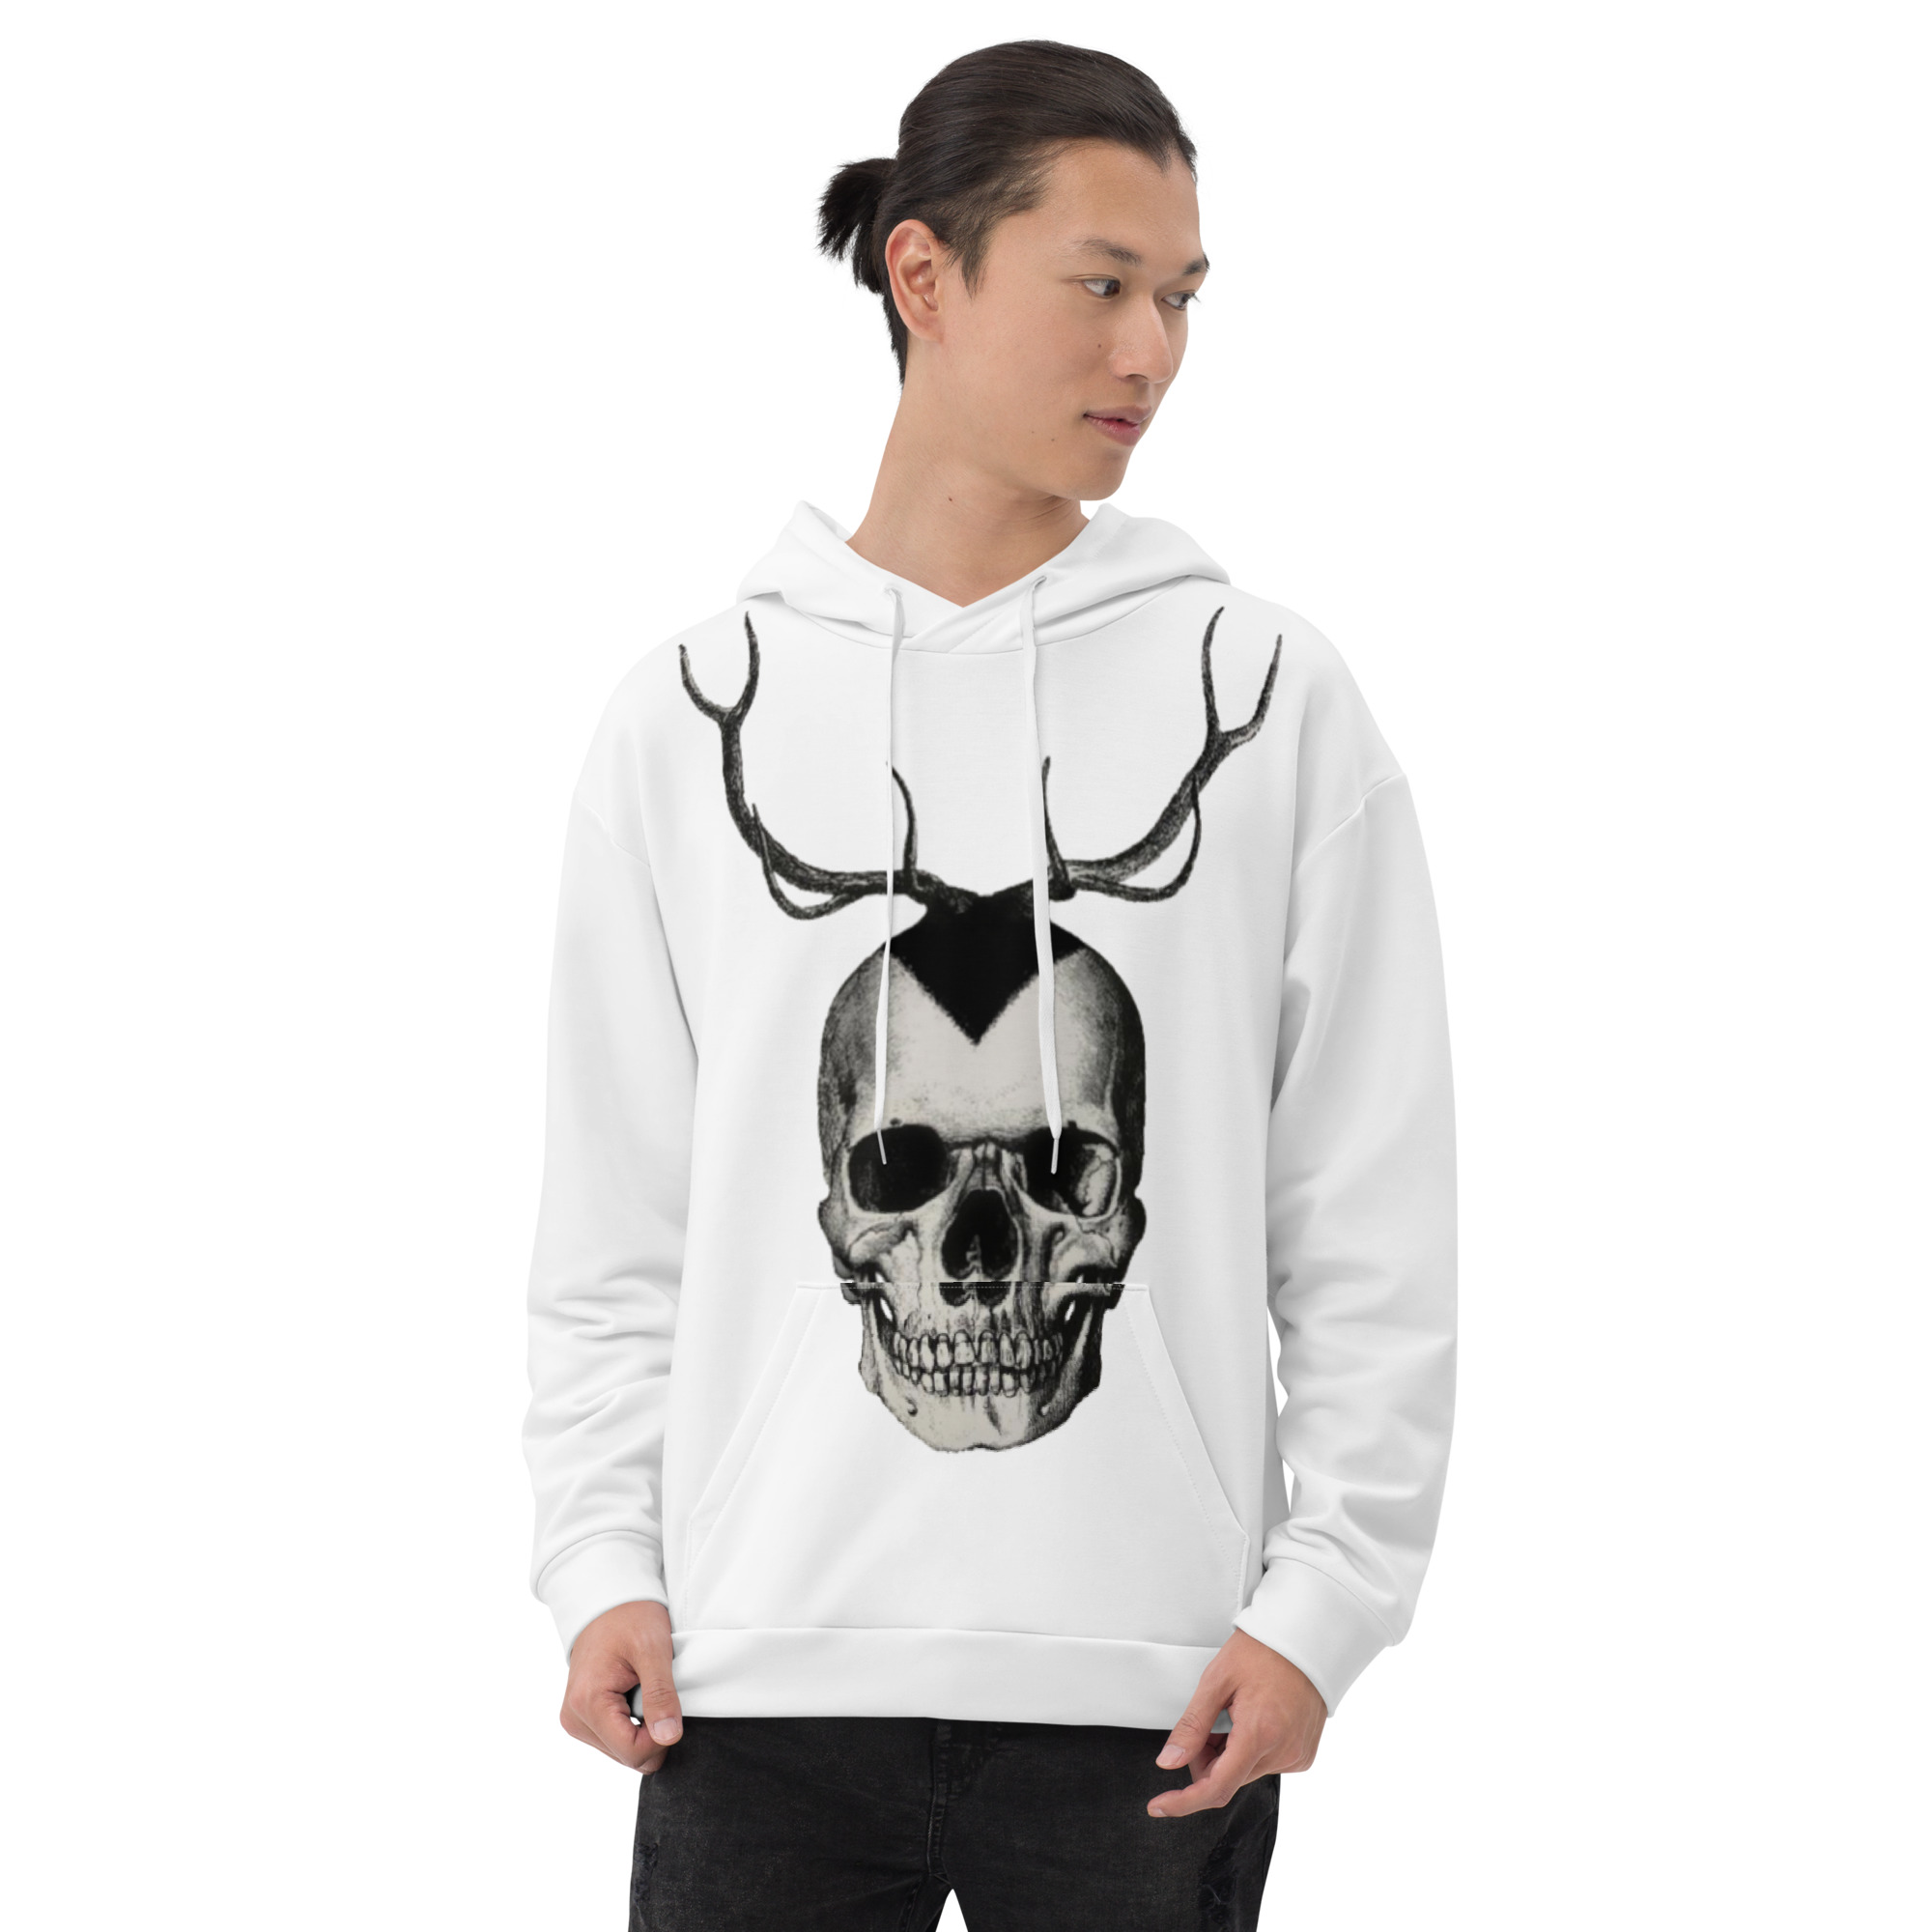 all-over-print-unisex-hoodie-white-front-63c86f73499ae.jpg